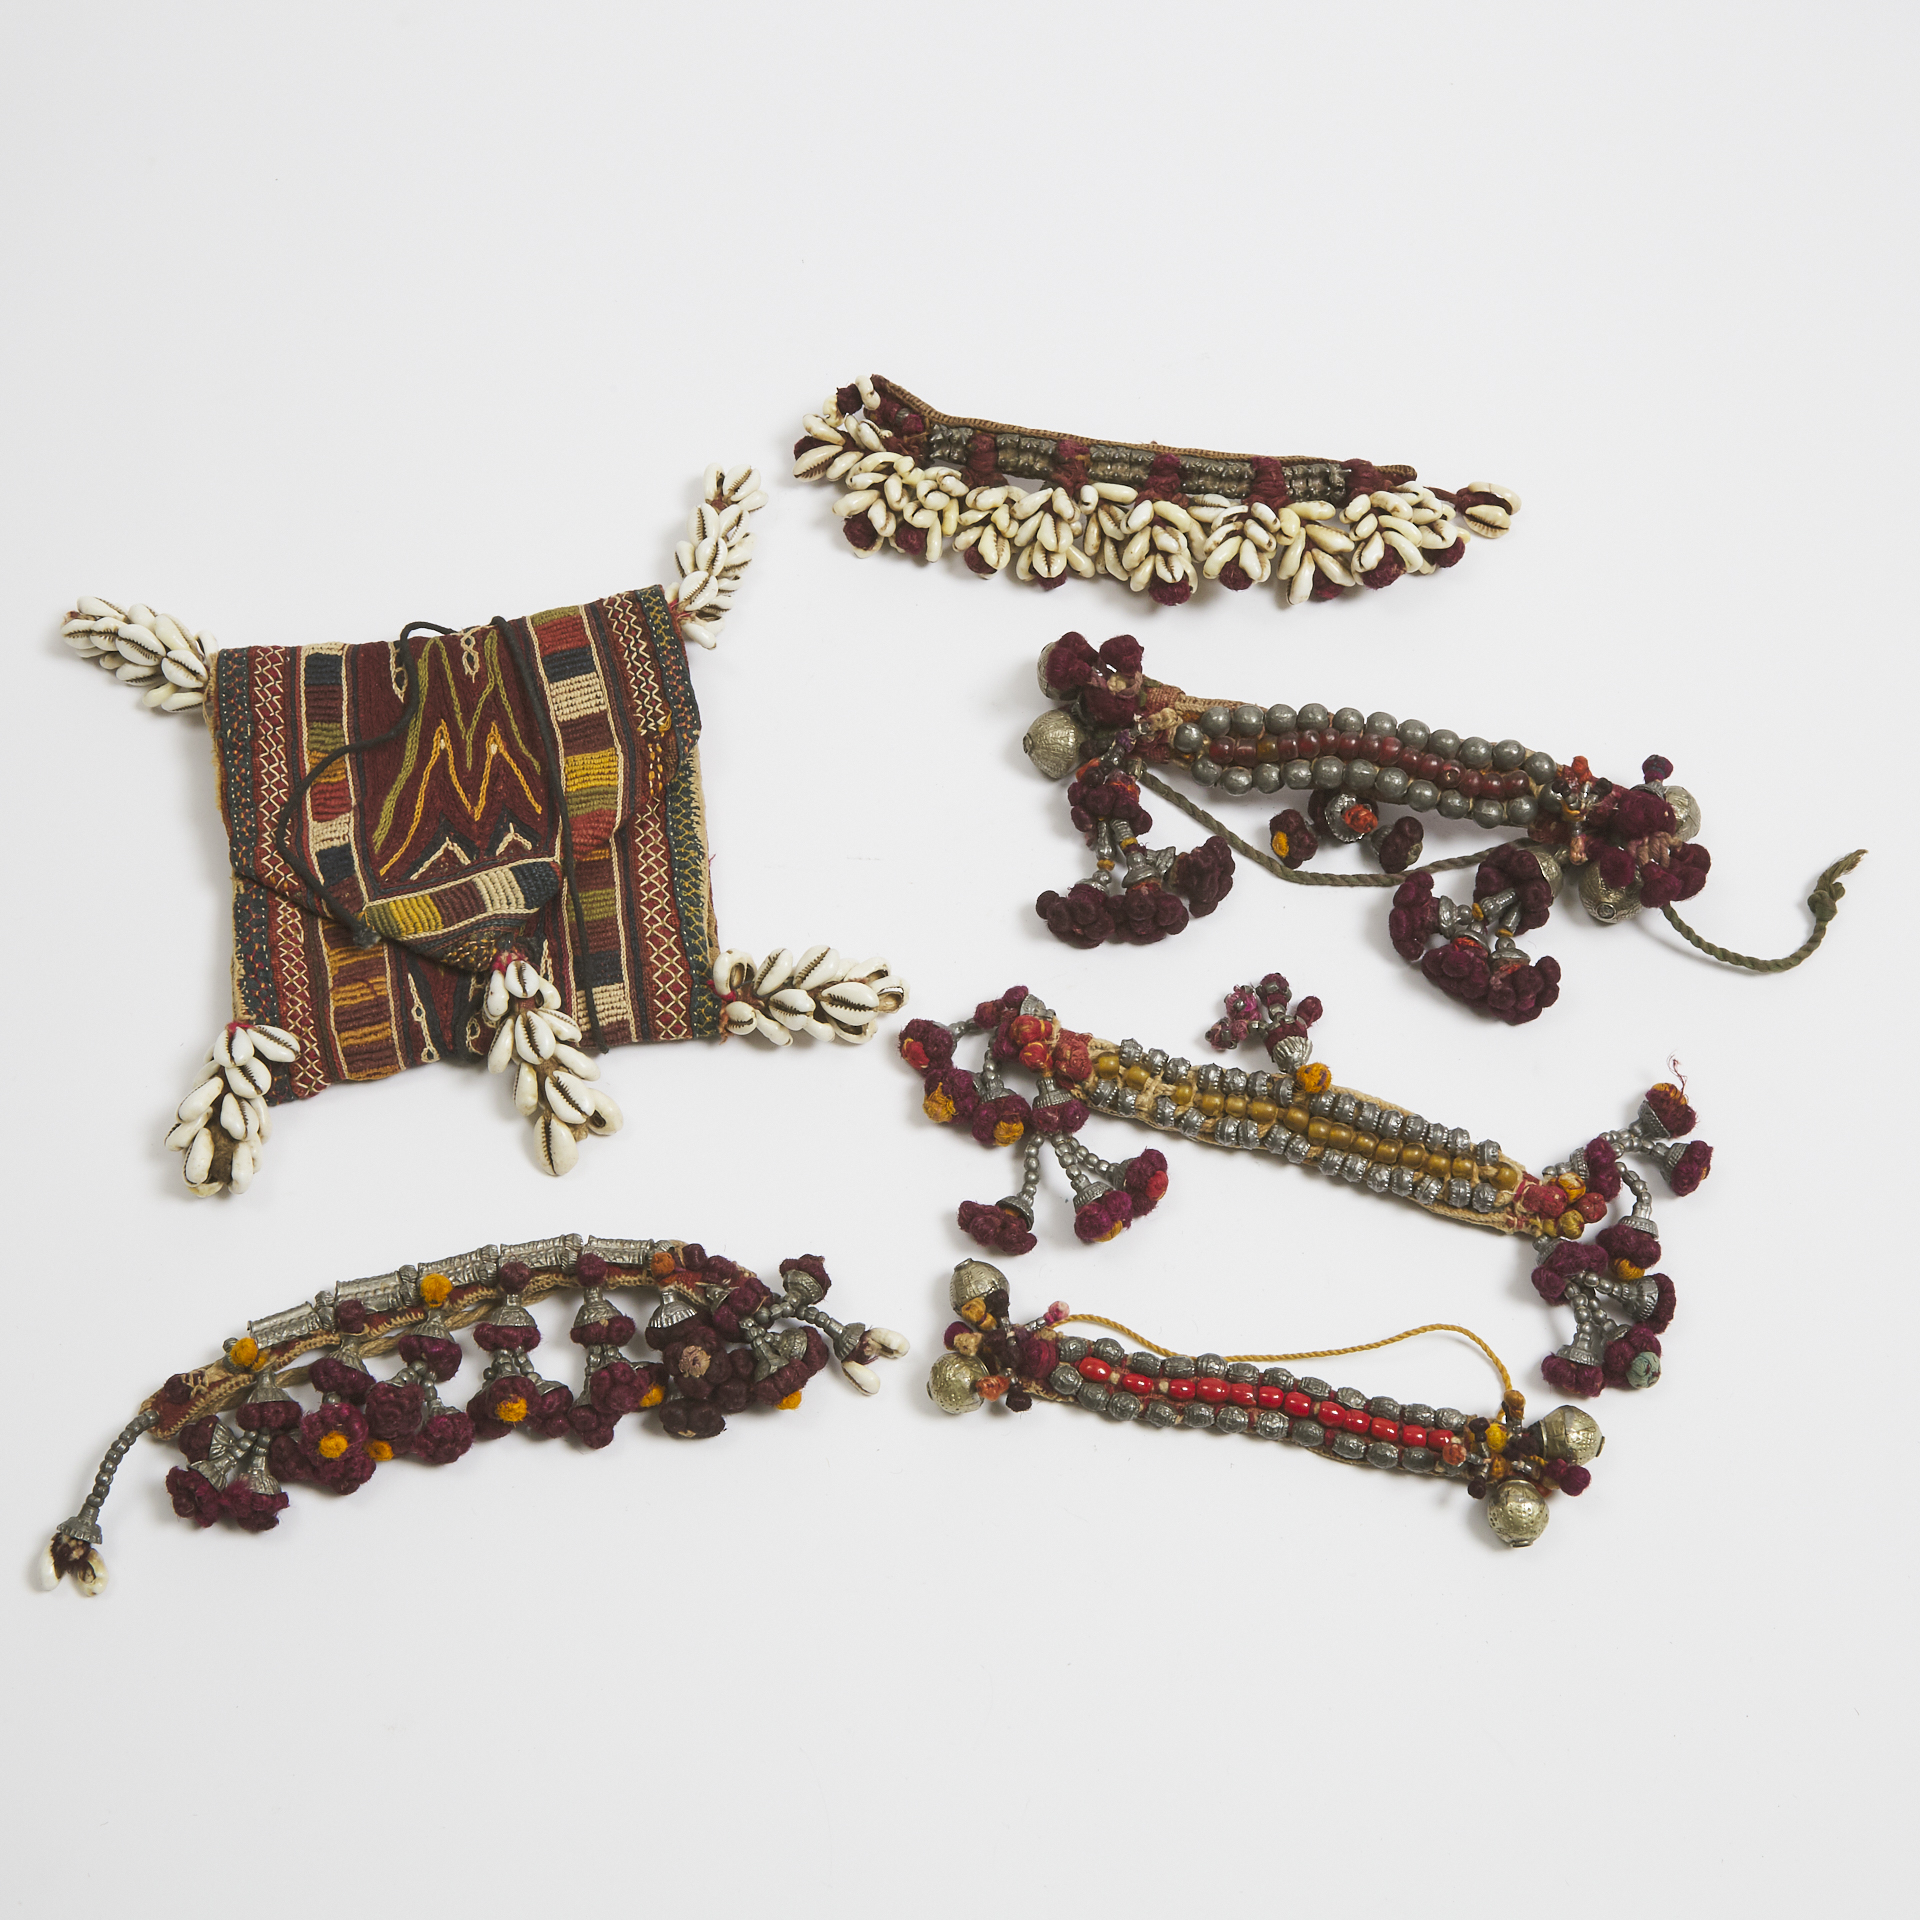 Group of Five Banjara Armlets together with a folding pouch, Goa, India, mid 20th century